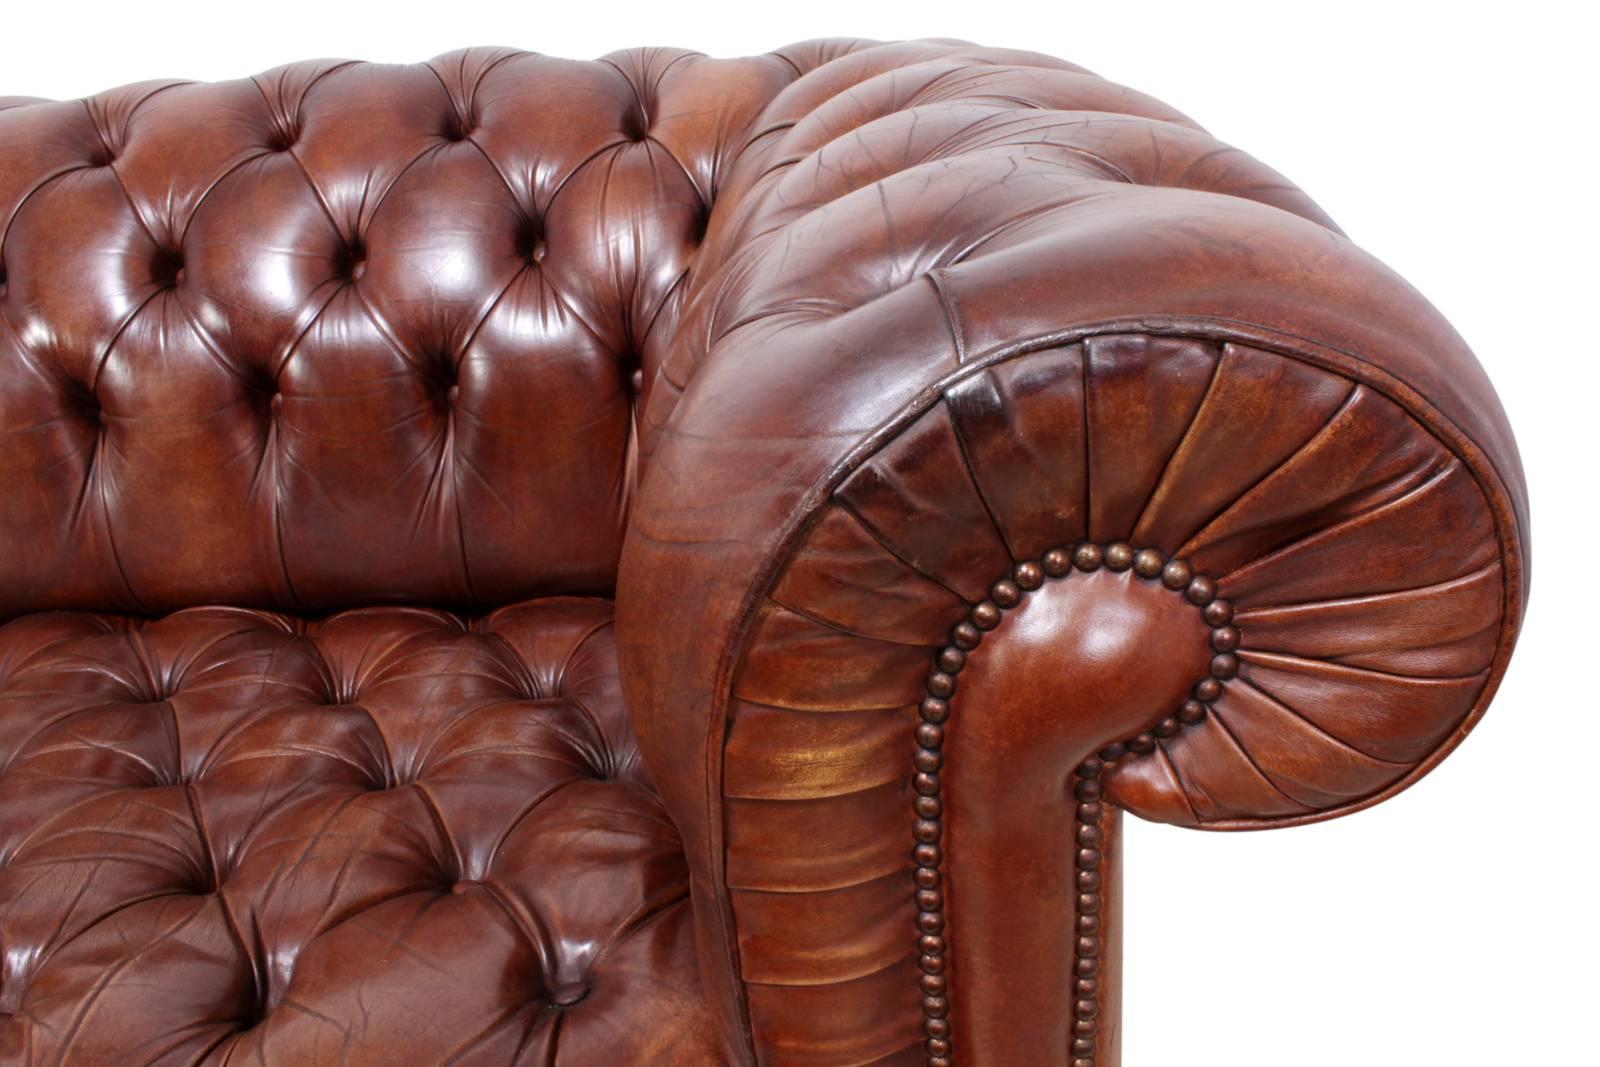 Brown leather buttoned chesterfield
A brown leather Chesterfield produced around the 1960s. Solid hardwood frame, thick Hand dyed, Chestnut brown leather upholstery, coil sprung seat, back and arms and turned feet. The sofa is in very good